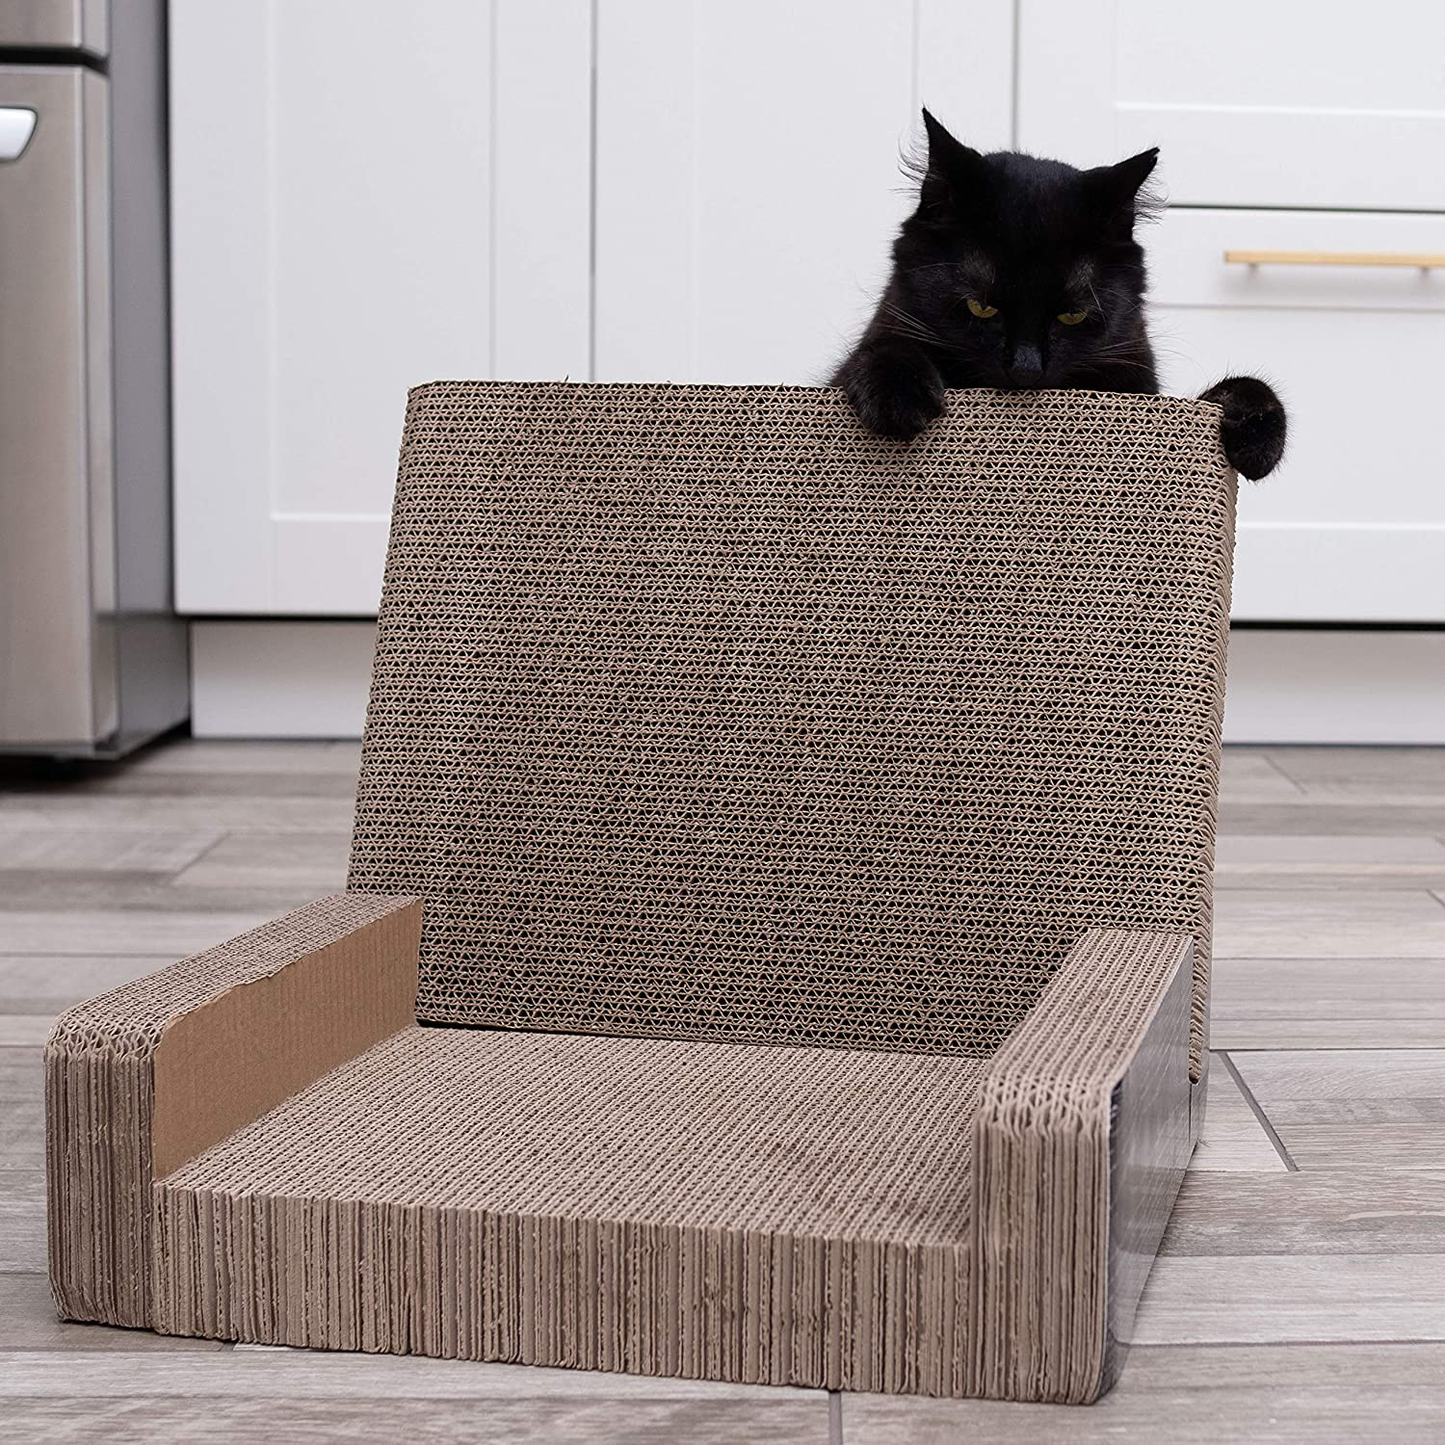 PURRFECT POUCH Luxe Cat Lounger and Cat Scratcher Toy Made of Extra Think Extra Corrugated Cardboard, Reversible for 2X the Scratching (Catnip Included)